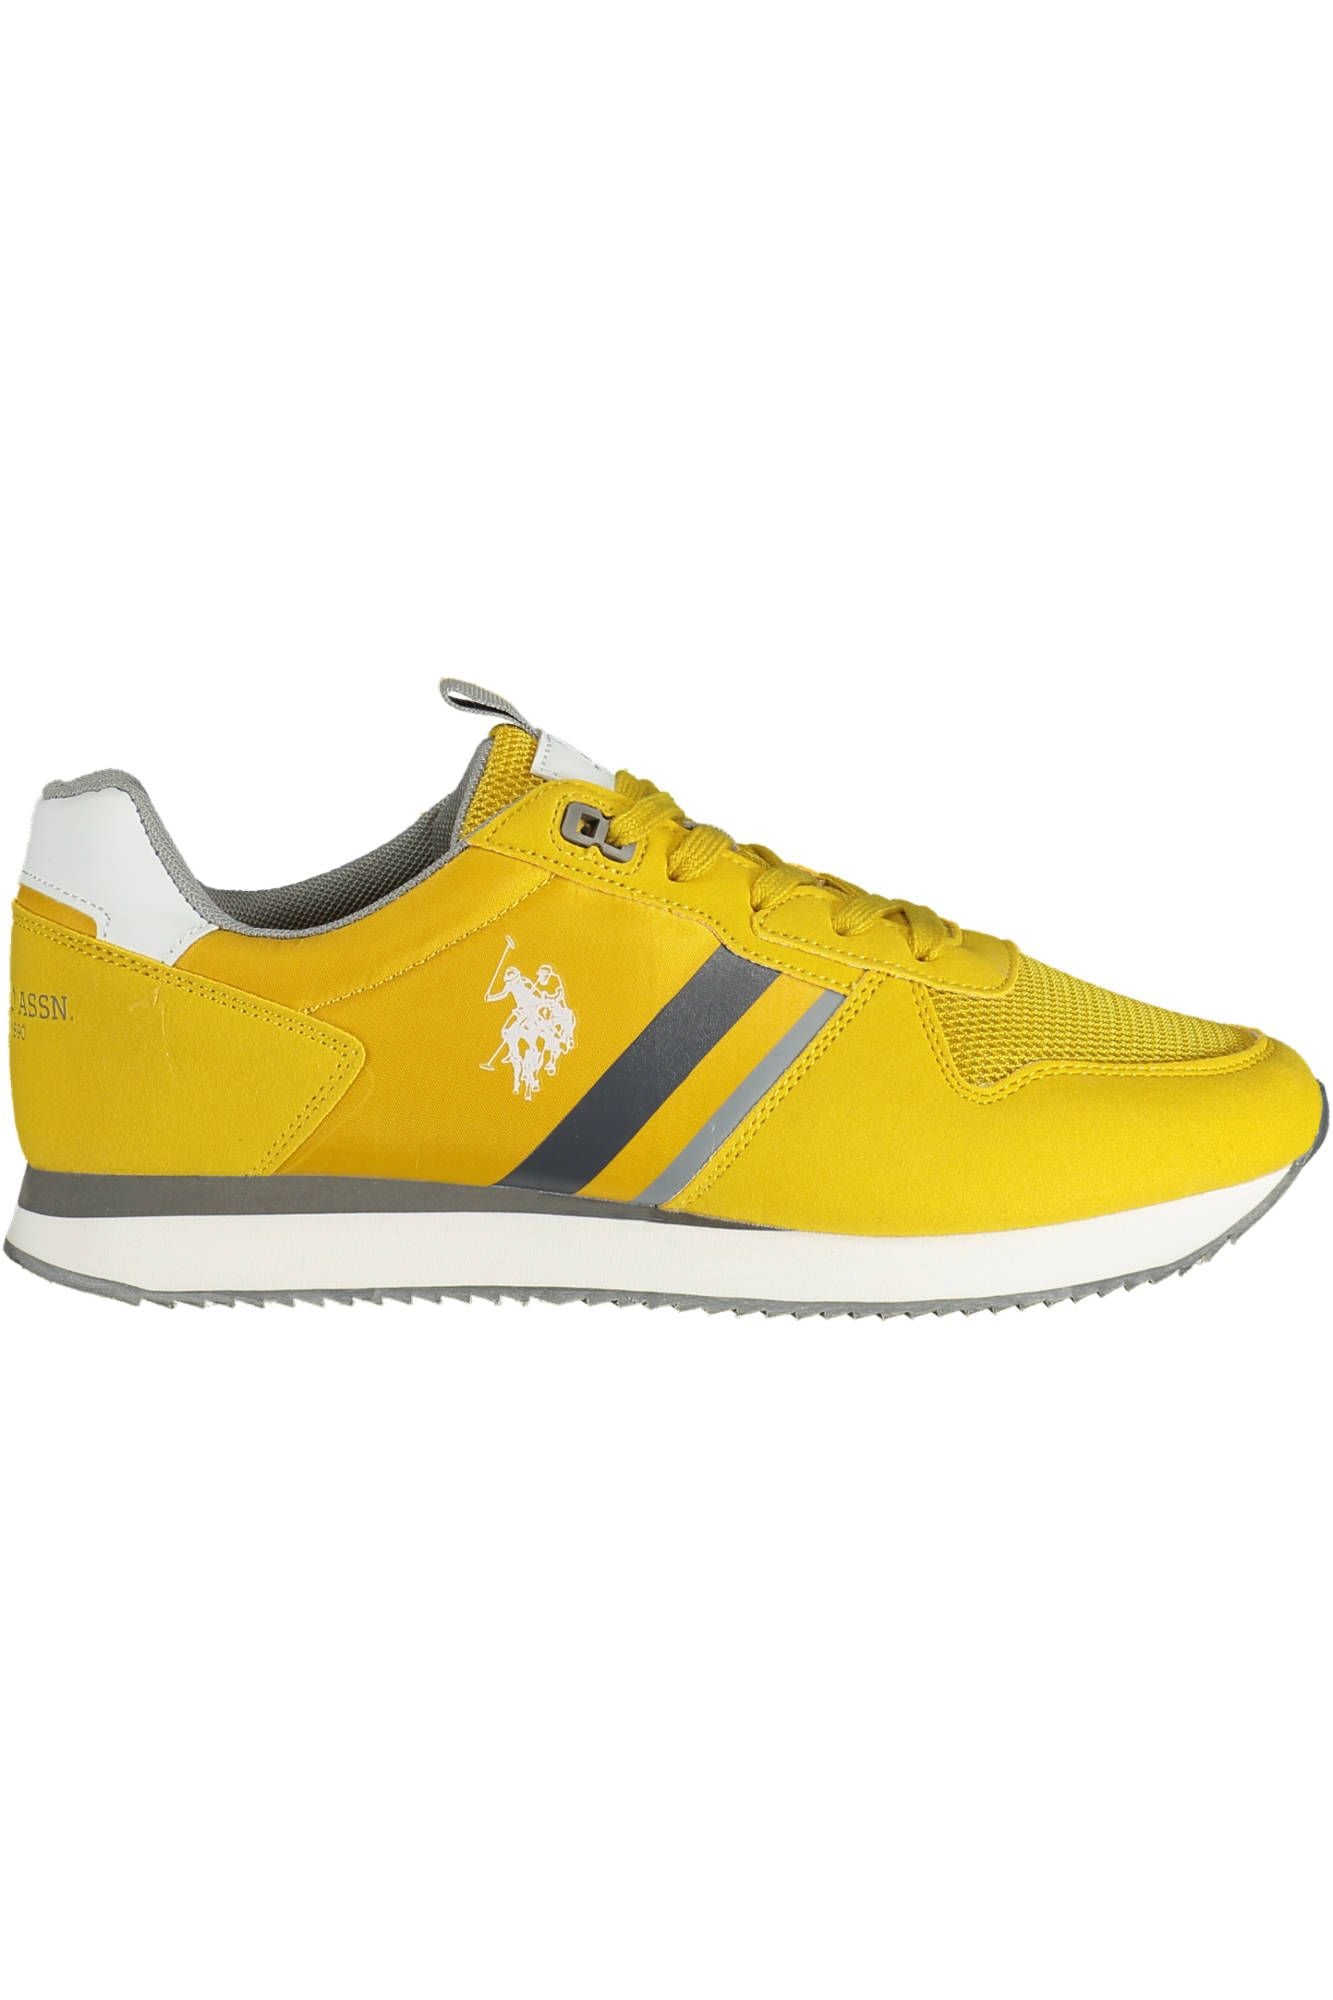 U.s. Polo Assn U. S. Polo Assn. Radiant Sports Sneakers With Contrasting Men's Details In Yellow